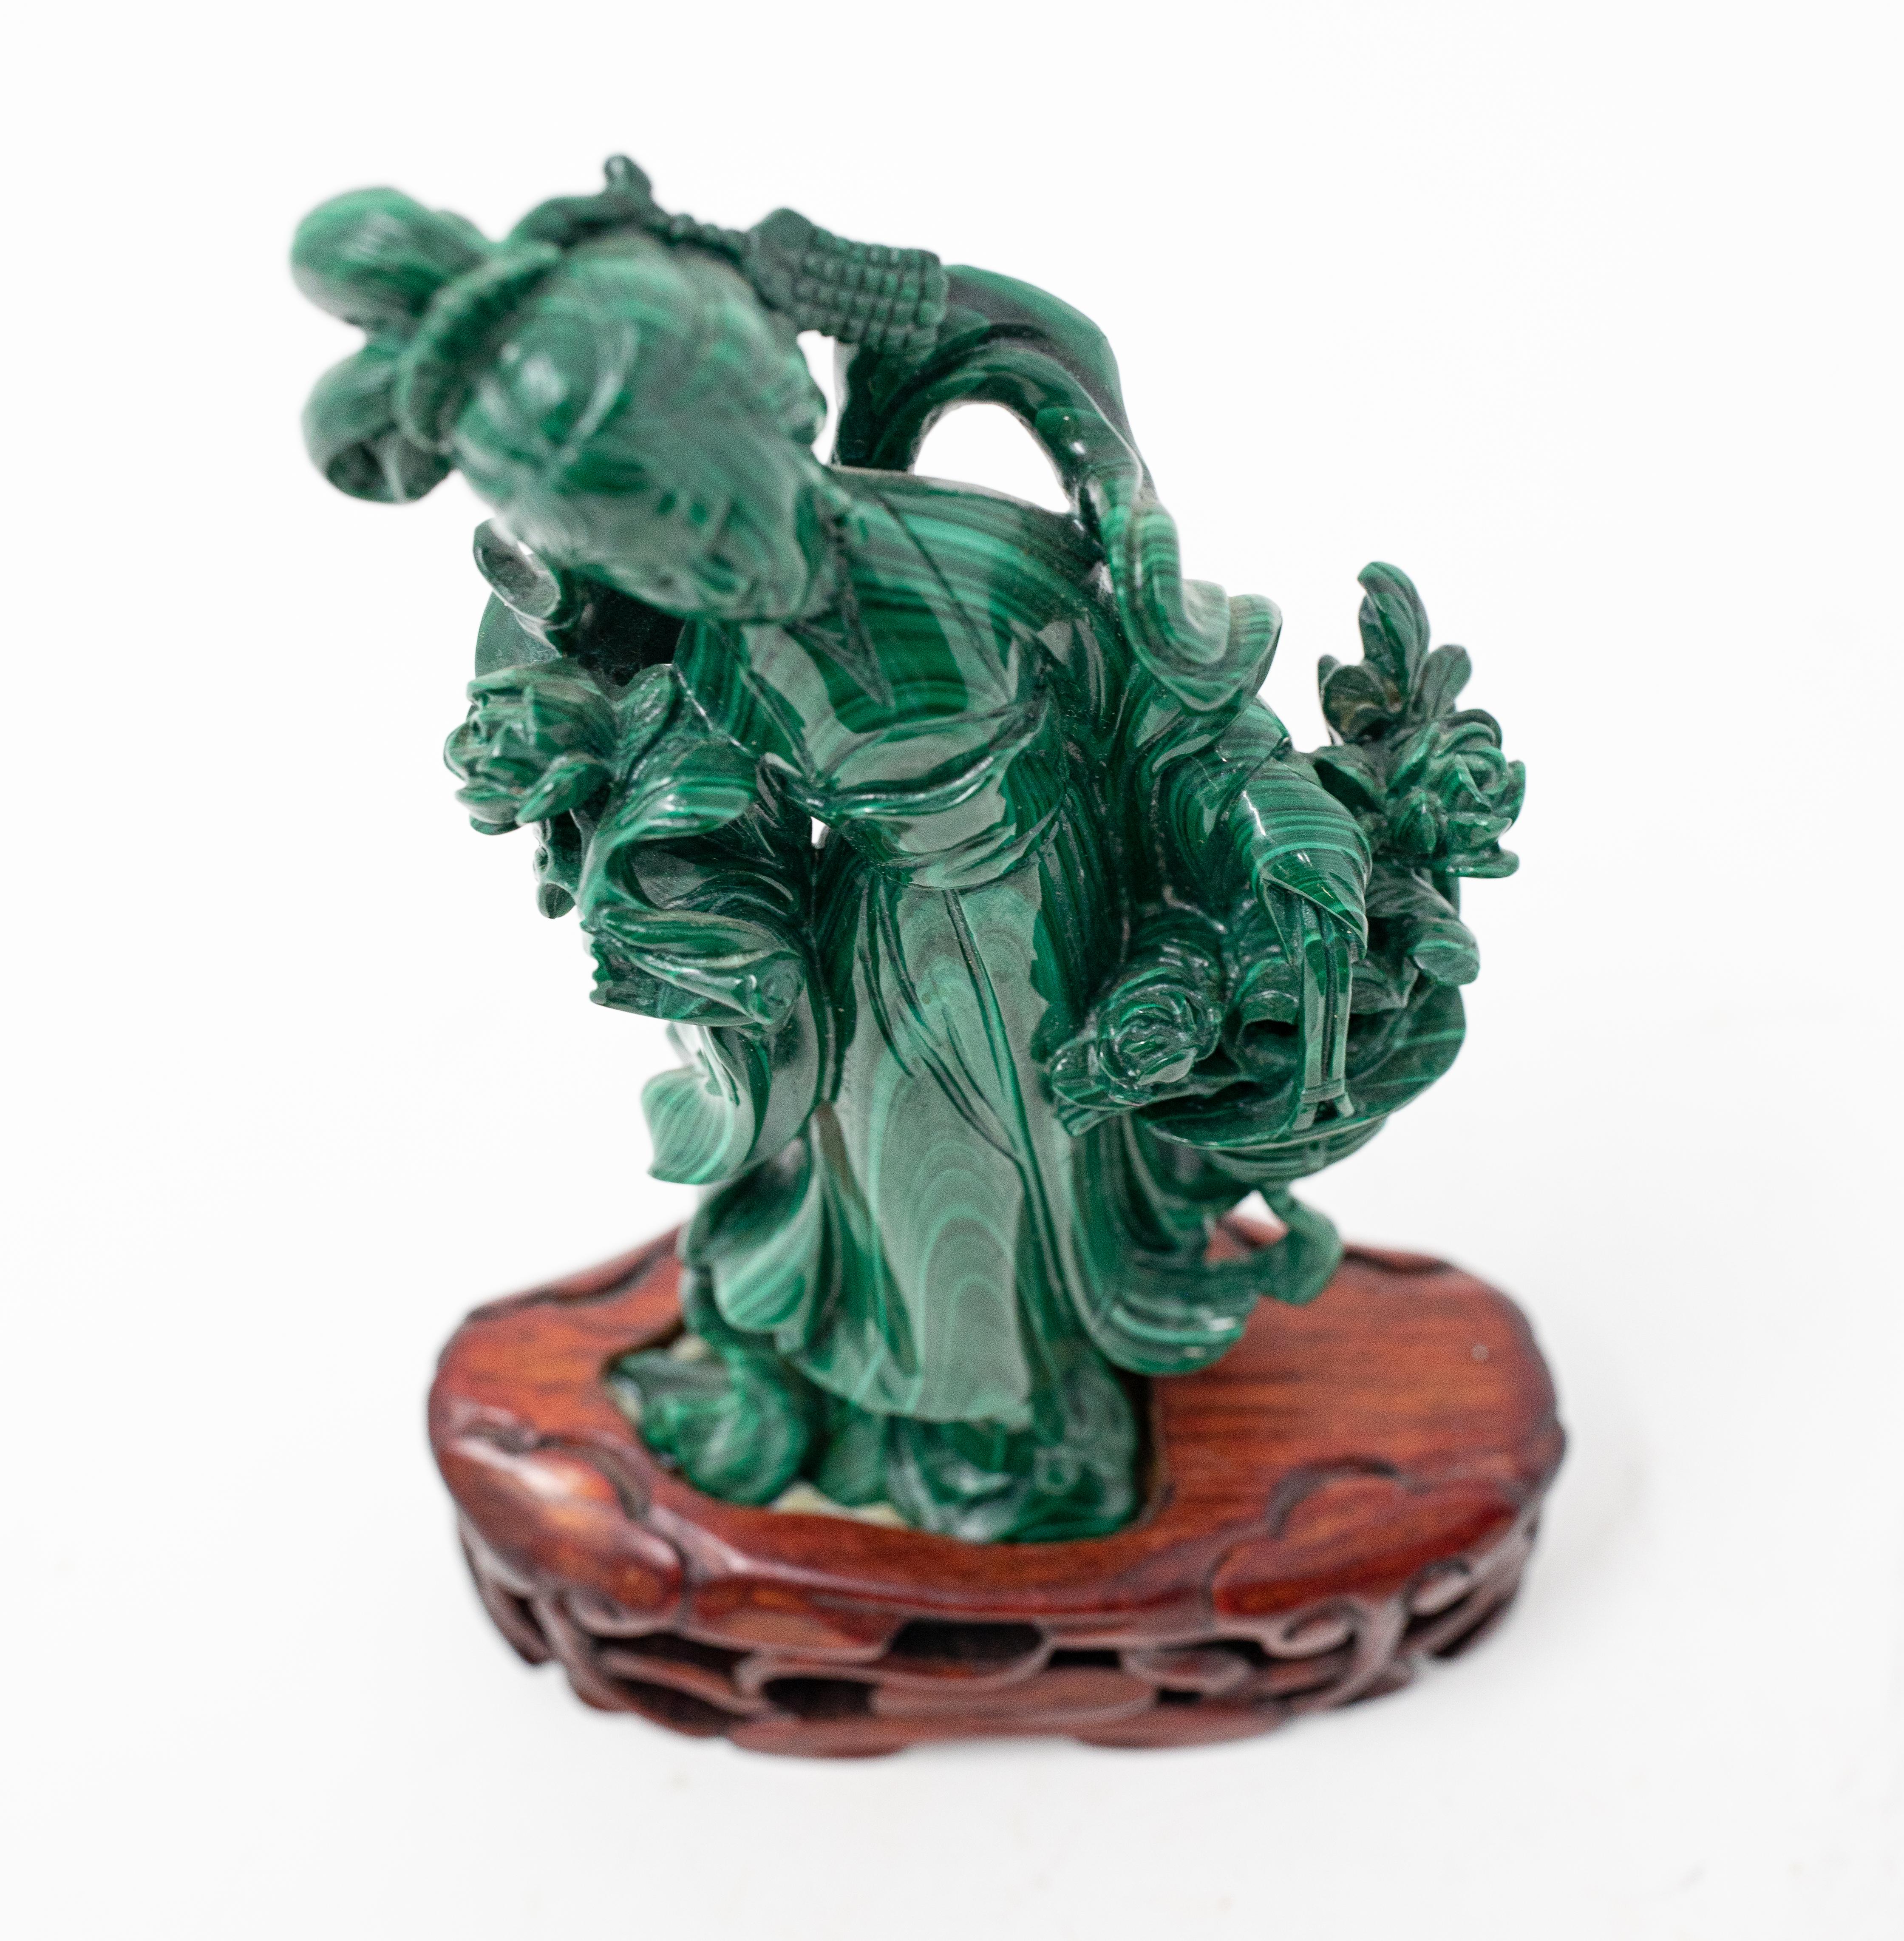 Offering the magnificent hand carved He Xiangu malachite statue on a rosewood base. Starting at the beautiful rosewood base it has open scrollwork and puffs. The He Xiangu is done gorgeously and all the natural striations were followed to make her